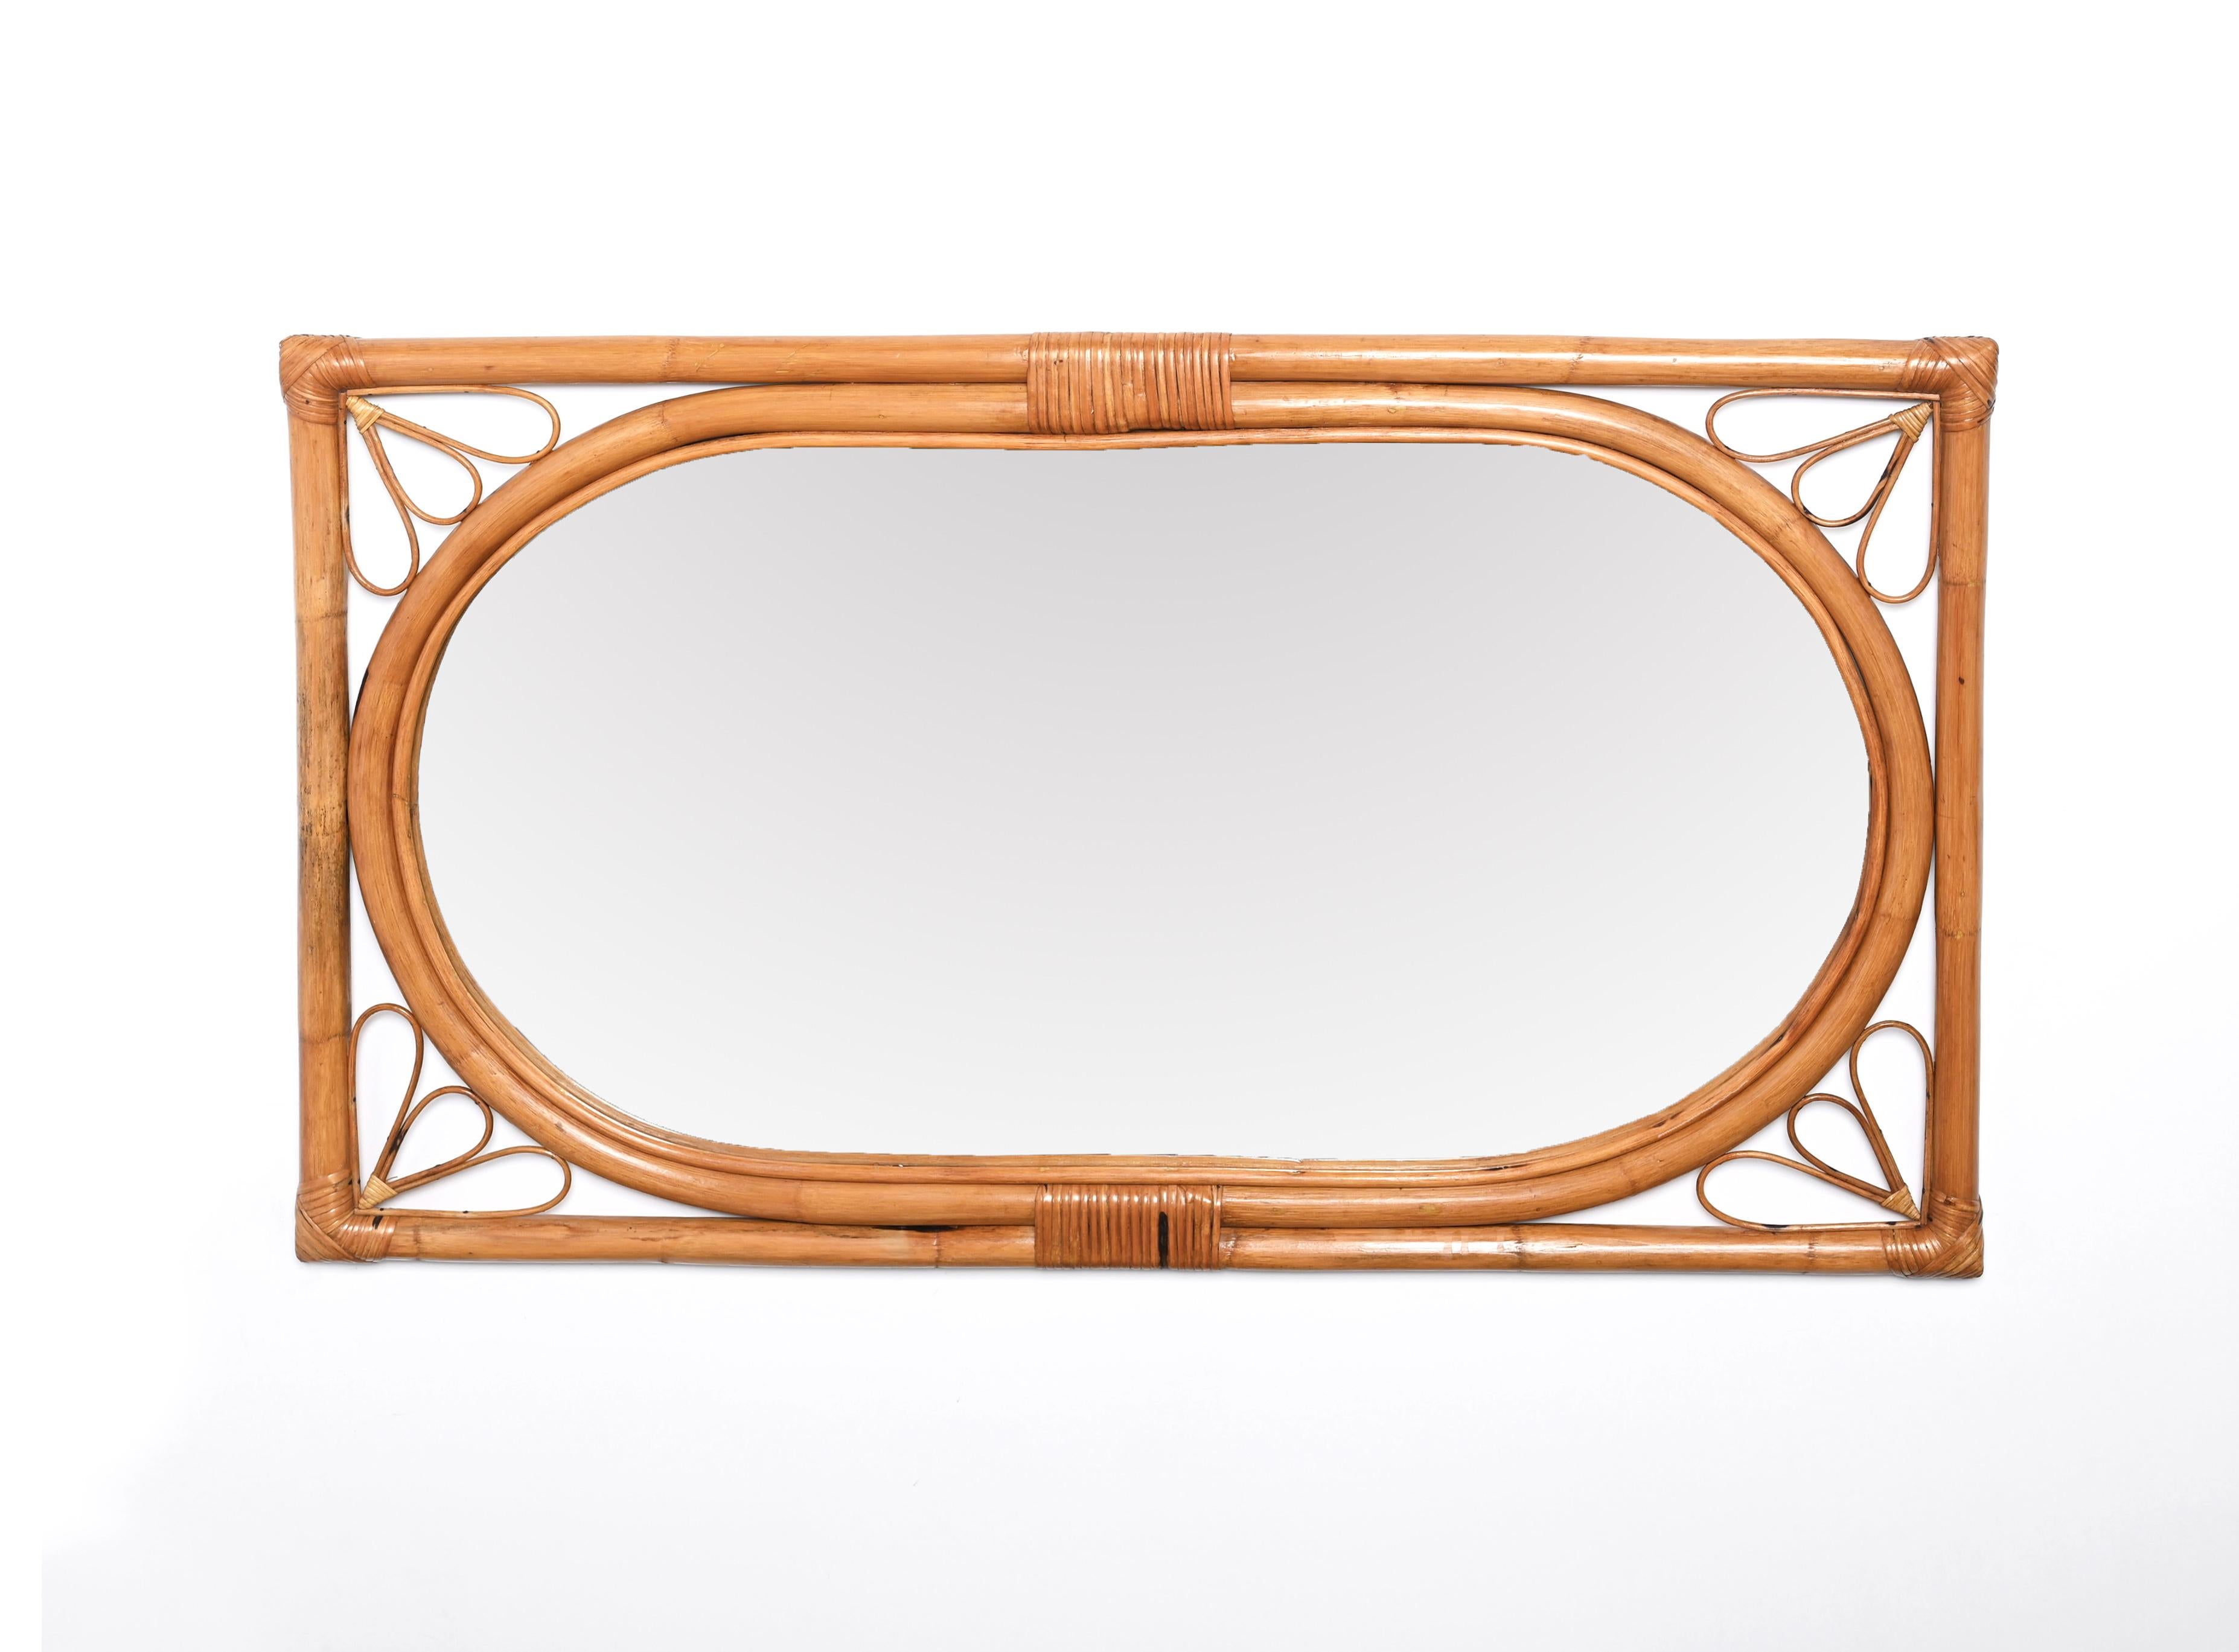 20th Century Midcentury Italian Mirror with Double Frame in Bamboo and Rattan, 1970s